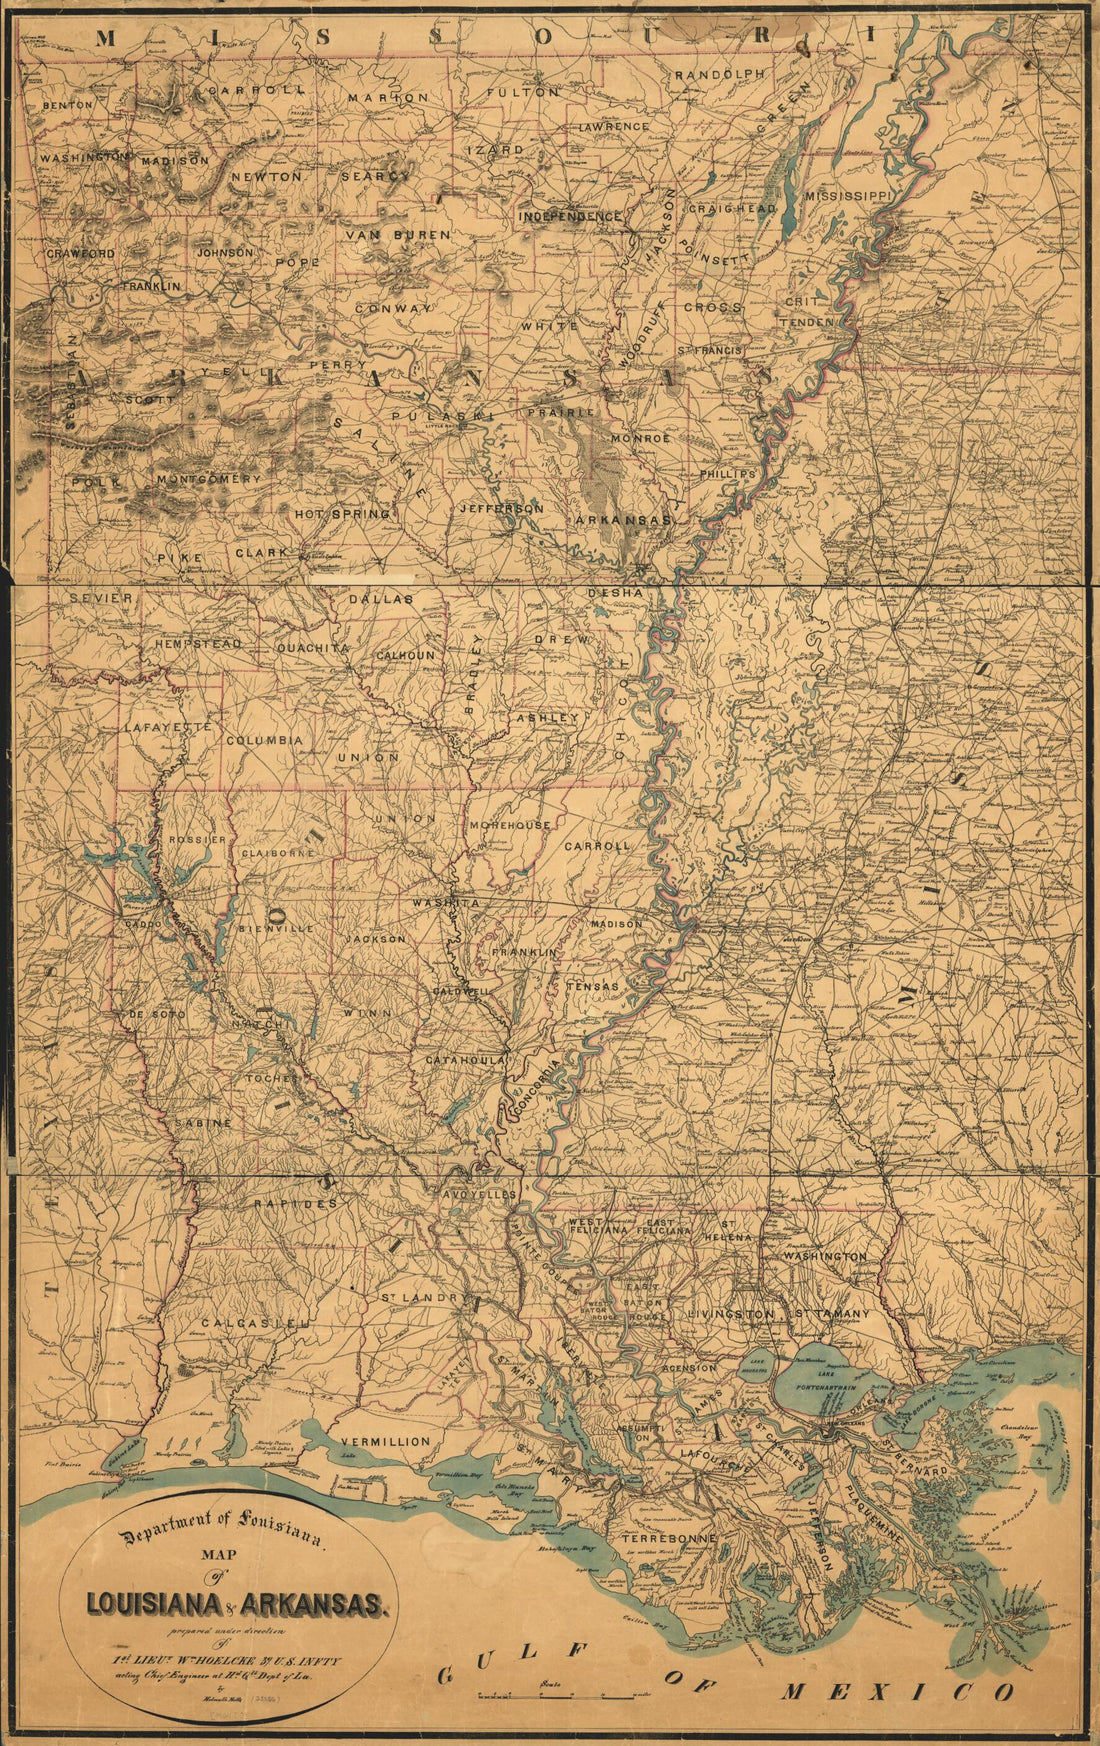 This old map of Map of Louisiana &amp; Arkansas from 1864 was created by Helmuth Holtz in 1864